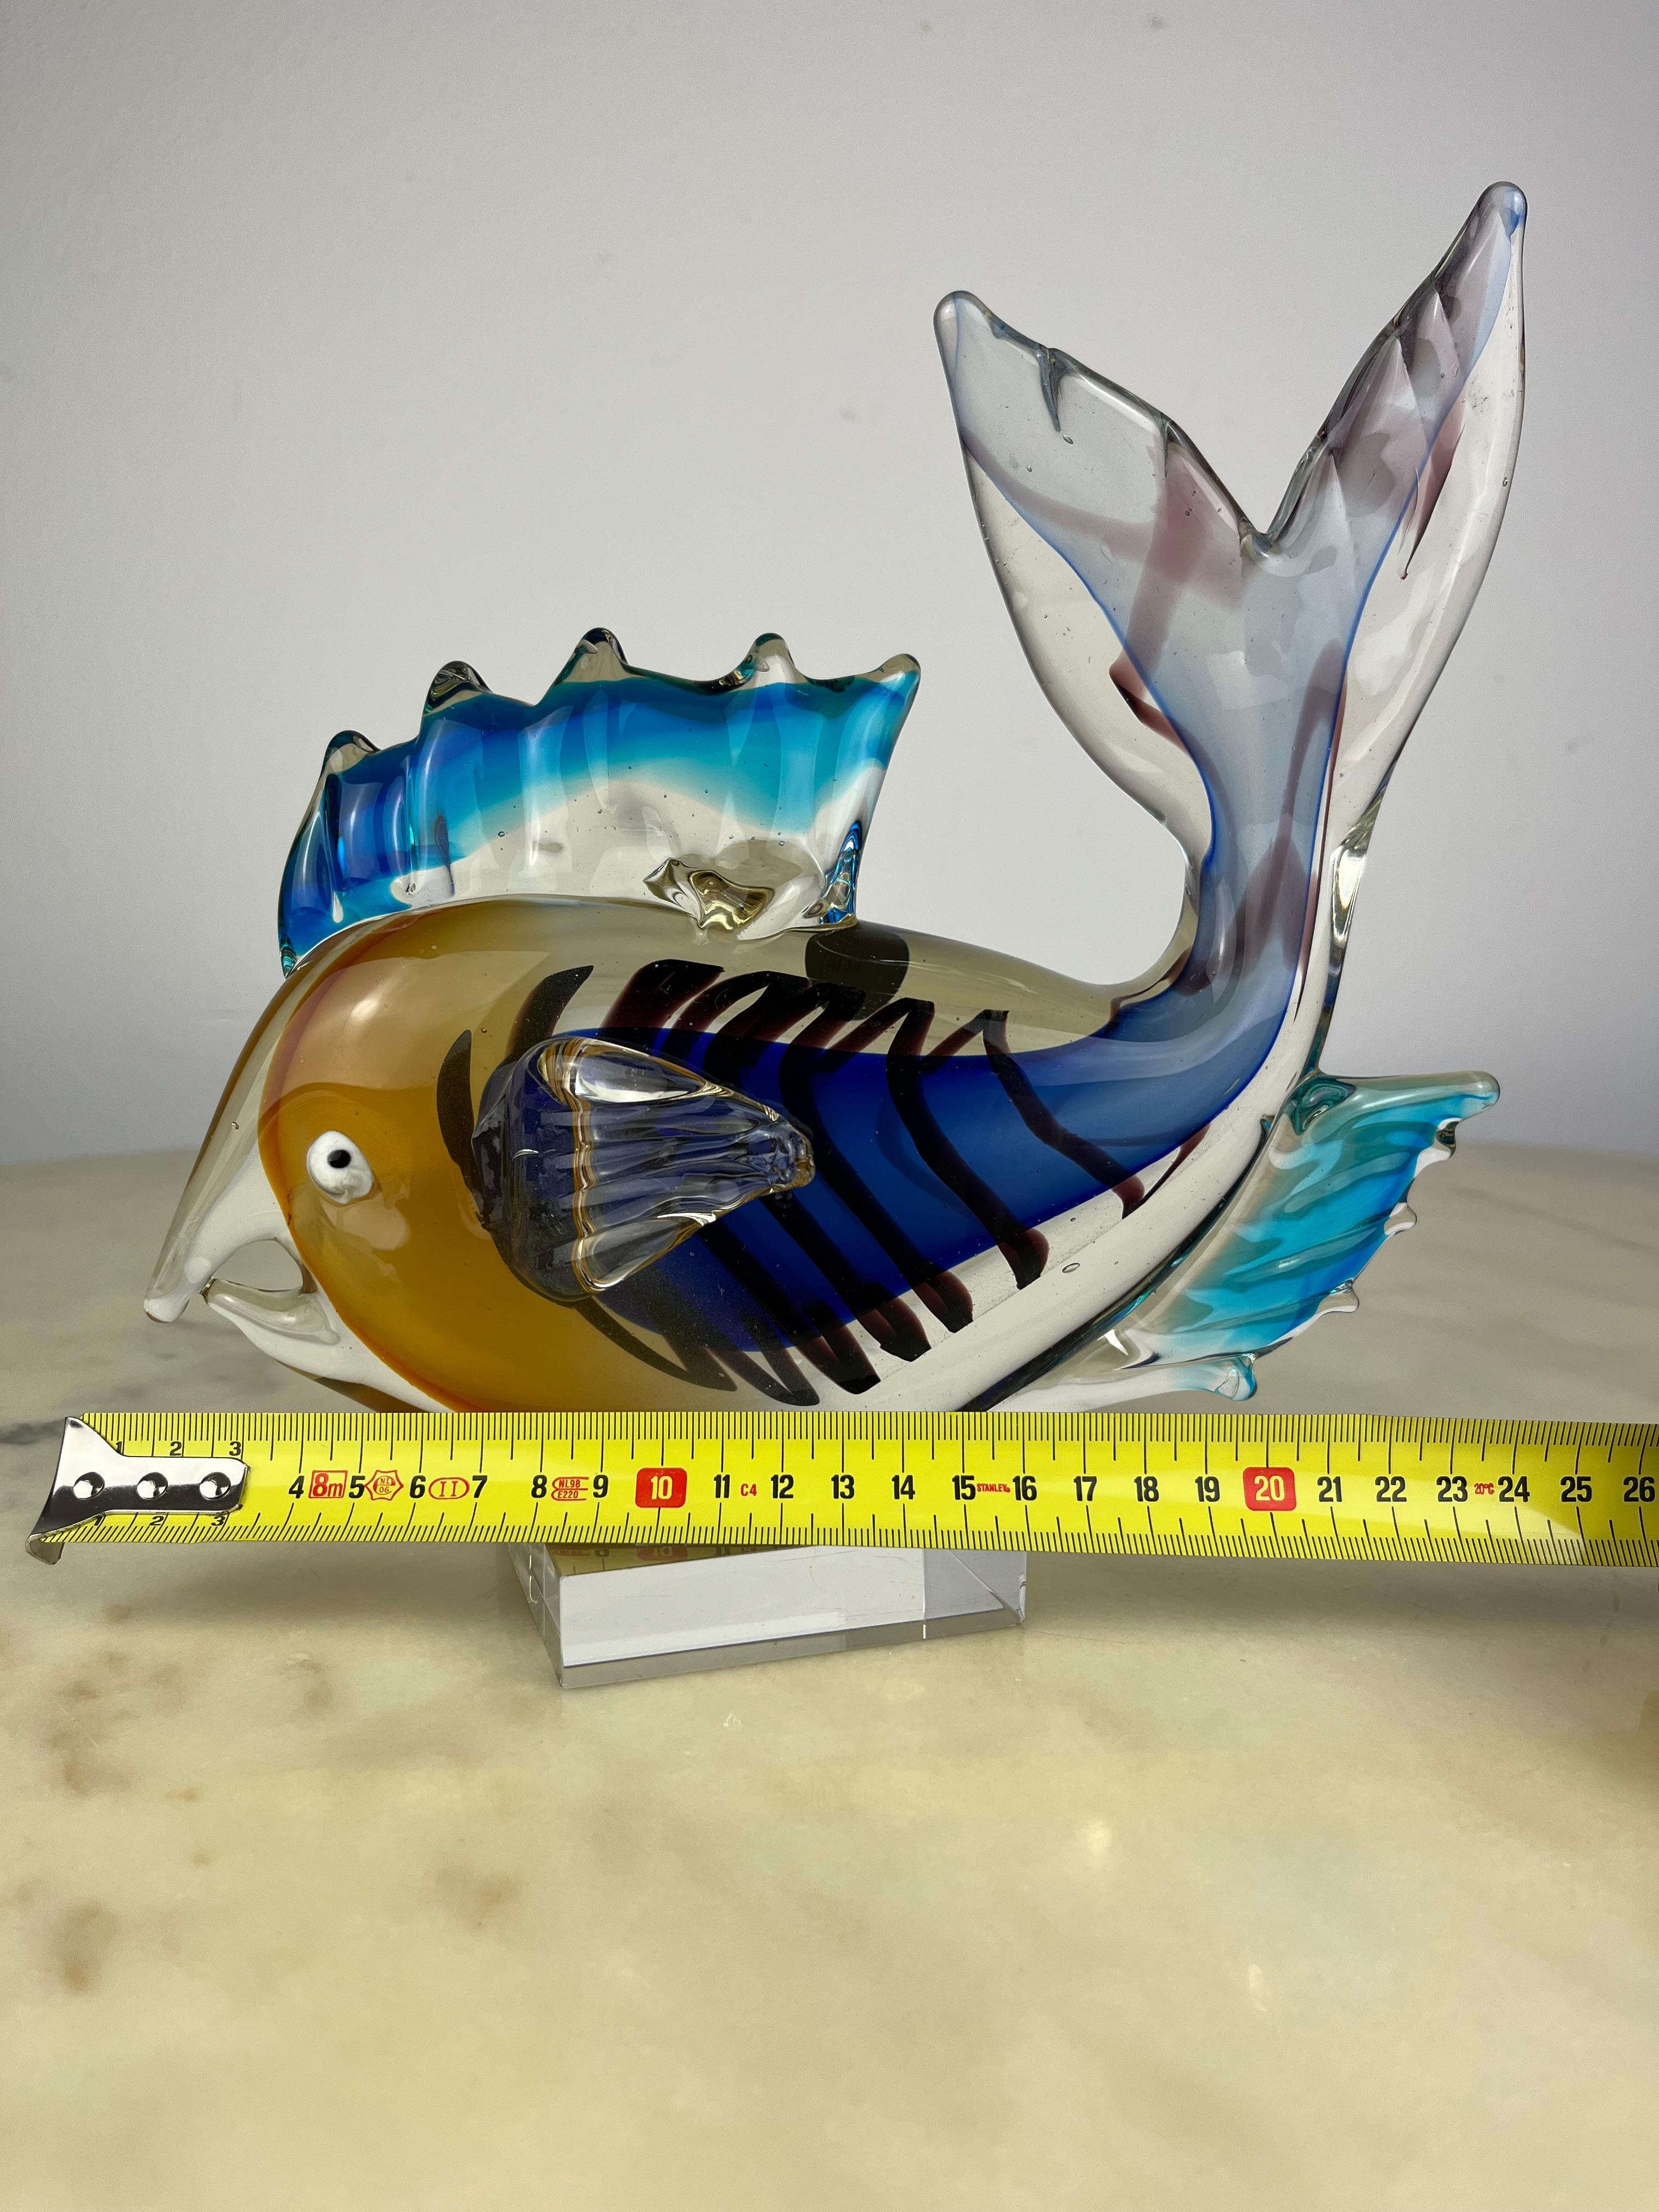 Large Vintage Murano Glass Fish, Italy, 1970s
It has always belonged to my family, purchased by my grandparents in Murano. Perfectly preserved, intact, it has small signs of aging.